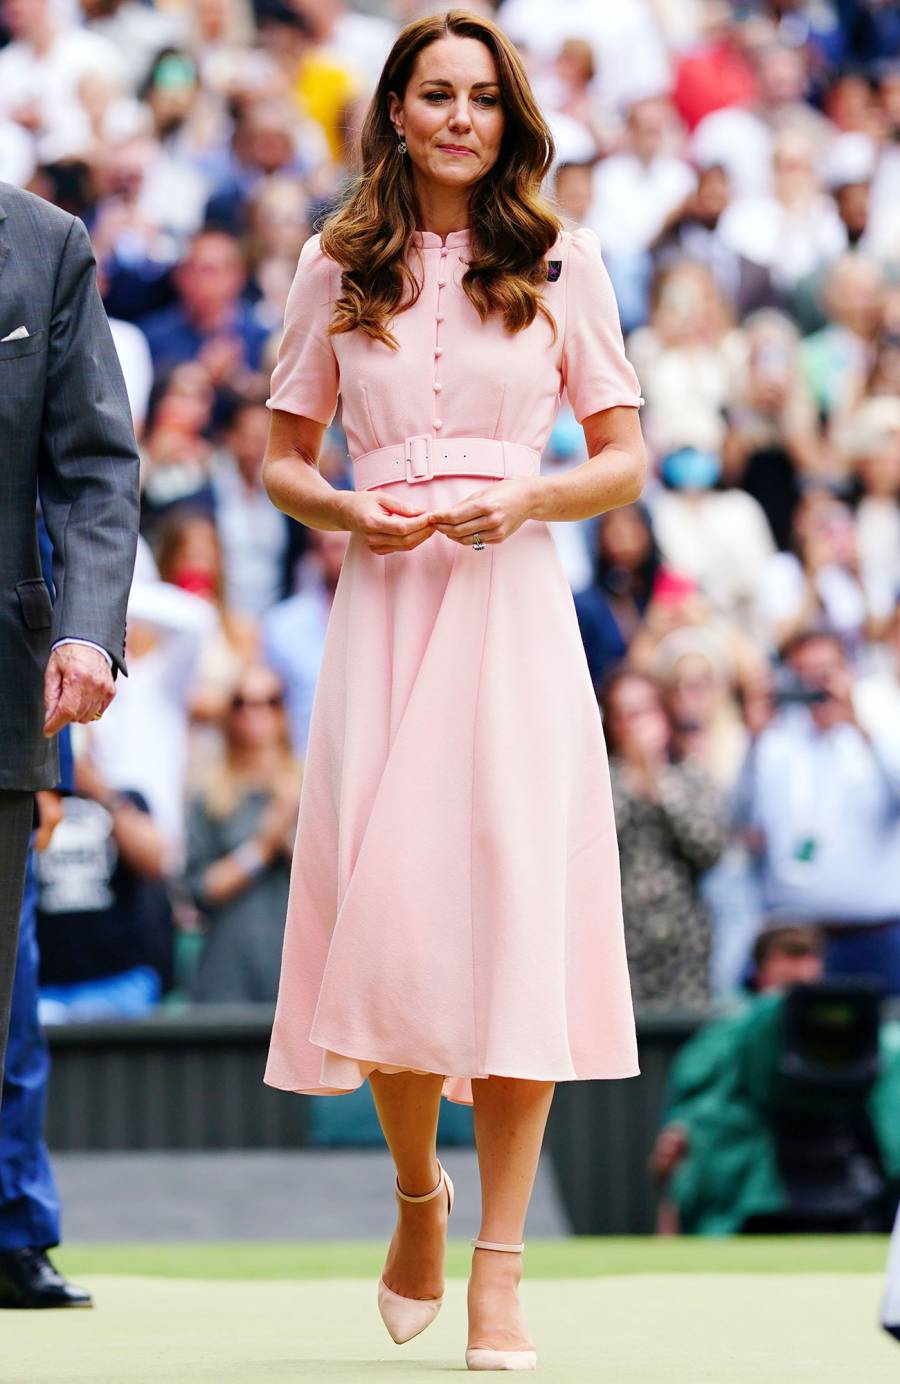 Gallery Update: Kate Middleton Style Evolution